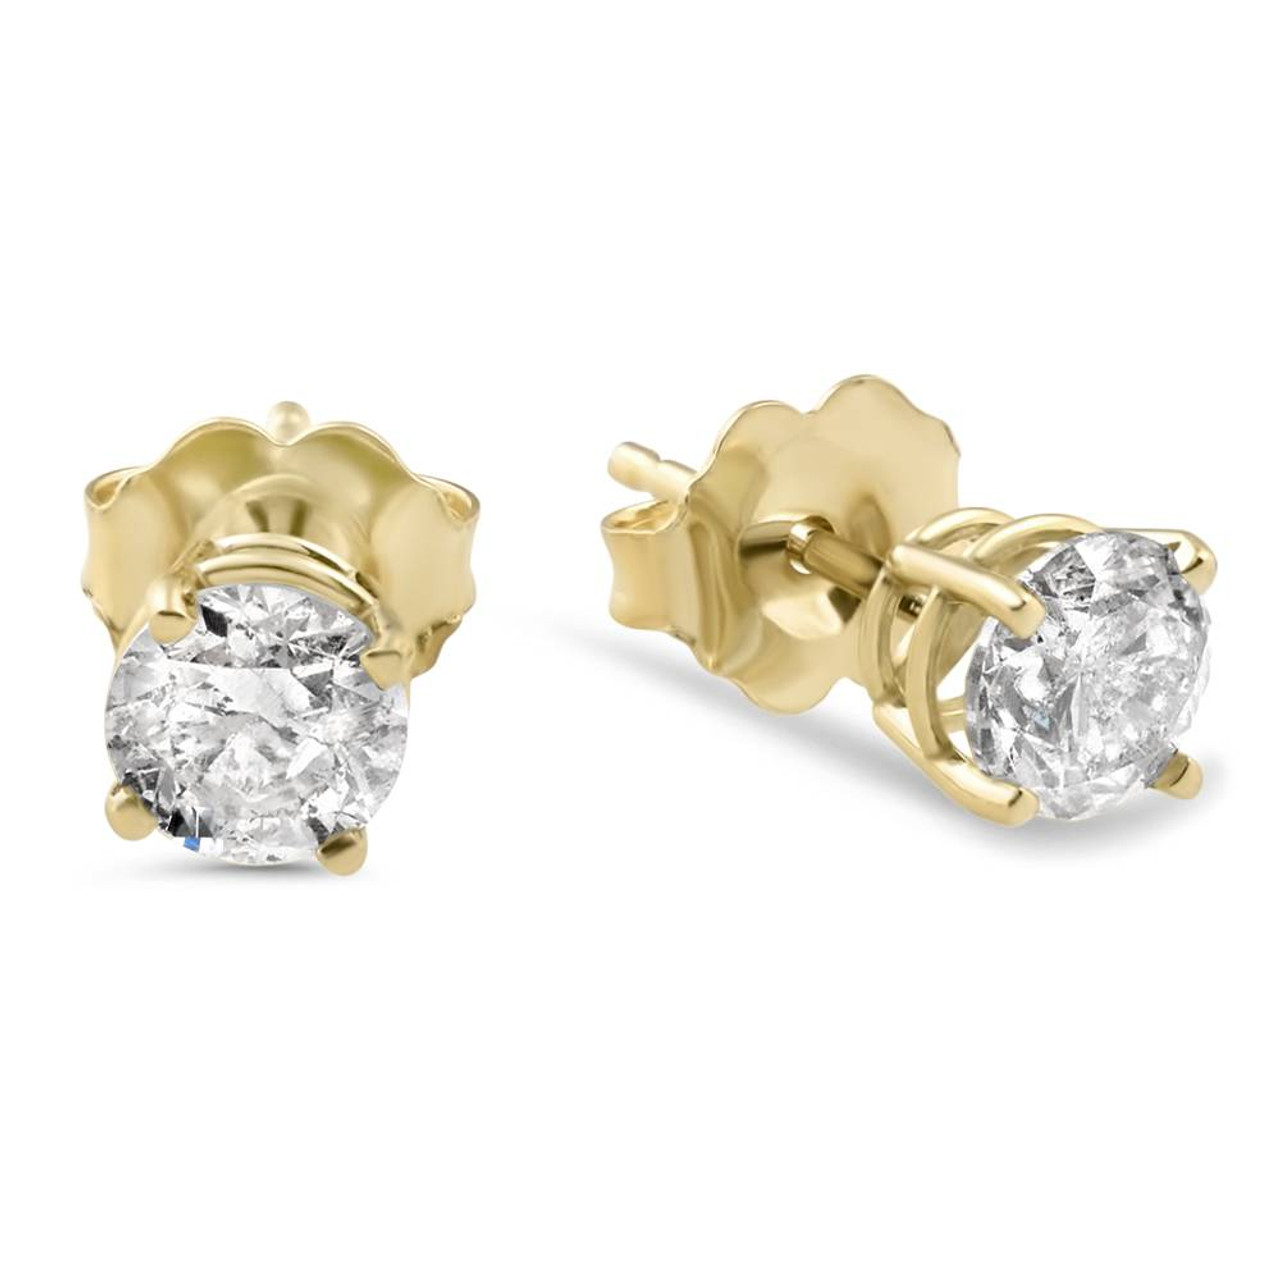 1/2Ct Round Diamond Studs Earrings in 14K White Or Yellow Gold Basket  Setting (H-I, I2-I3)